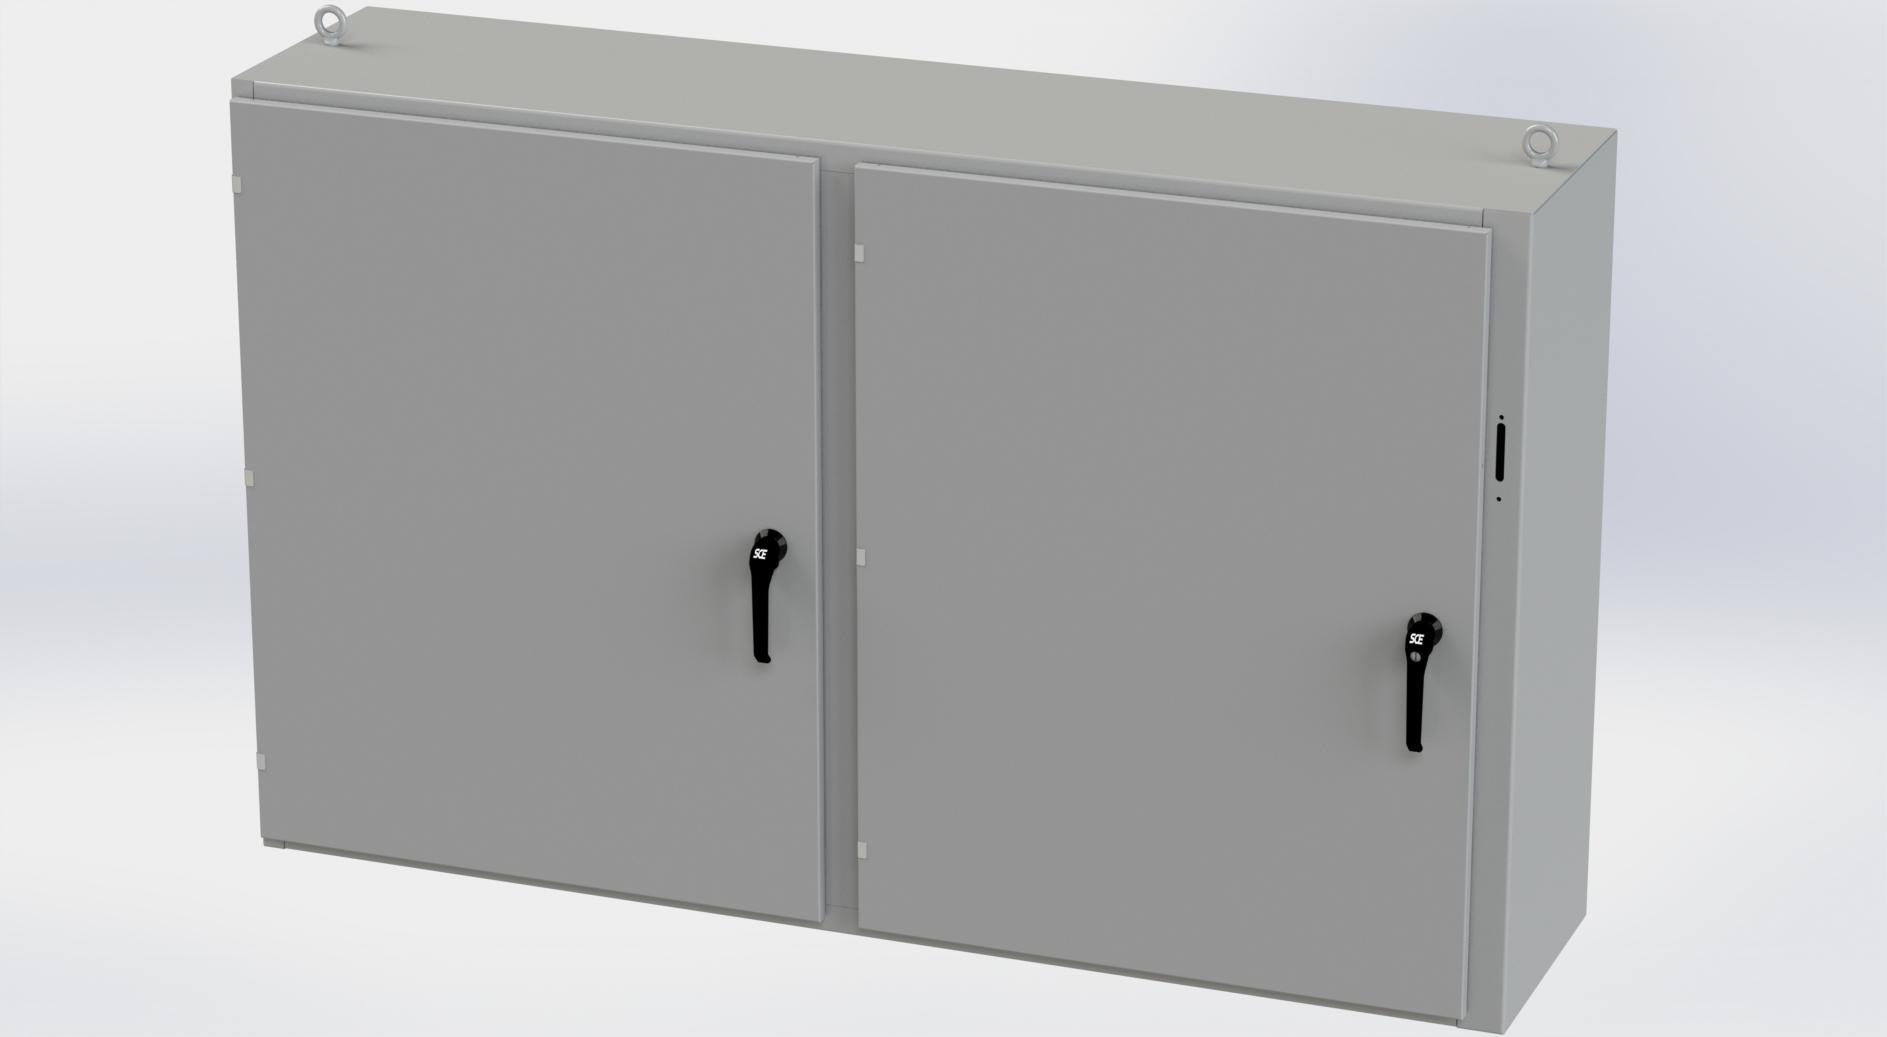 Saginaw Control SCE-48X2D7818 2DR Disc. Enclosure, Height:48.00", Width:77.75", Depth:18.00", ANSI-61 gray powder coating inside and out. Optional sub-panels are powder coated white.